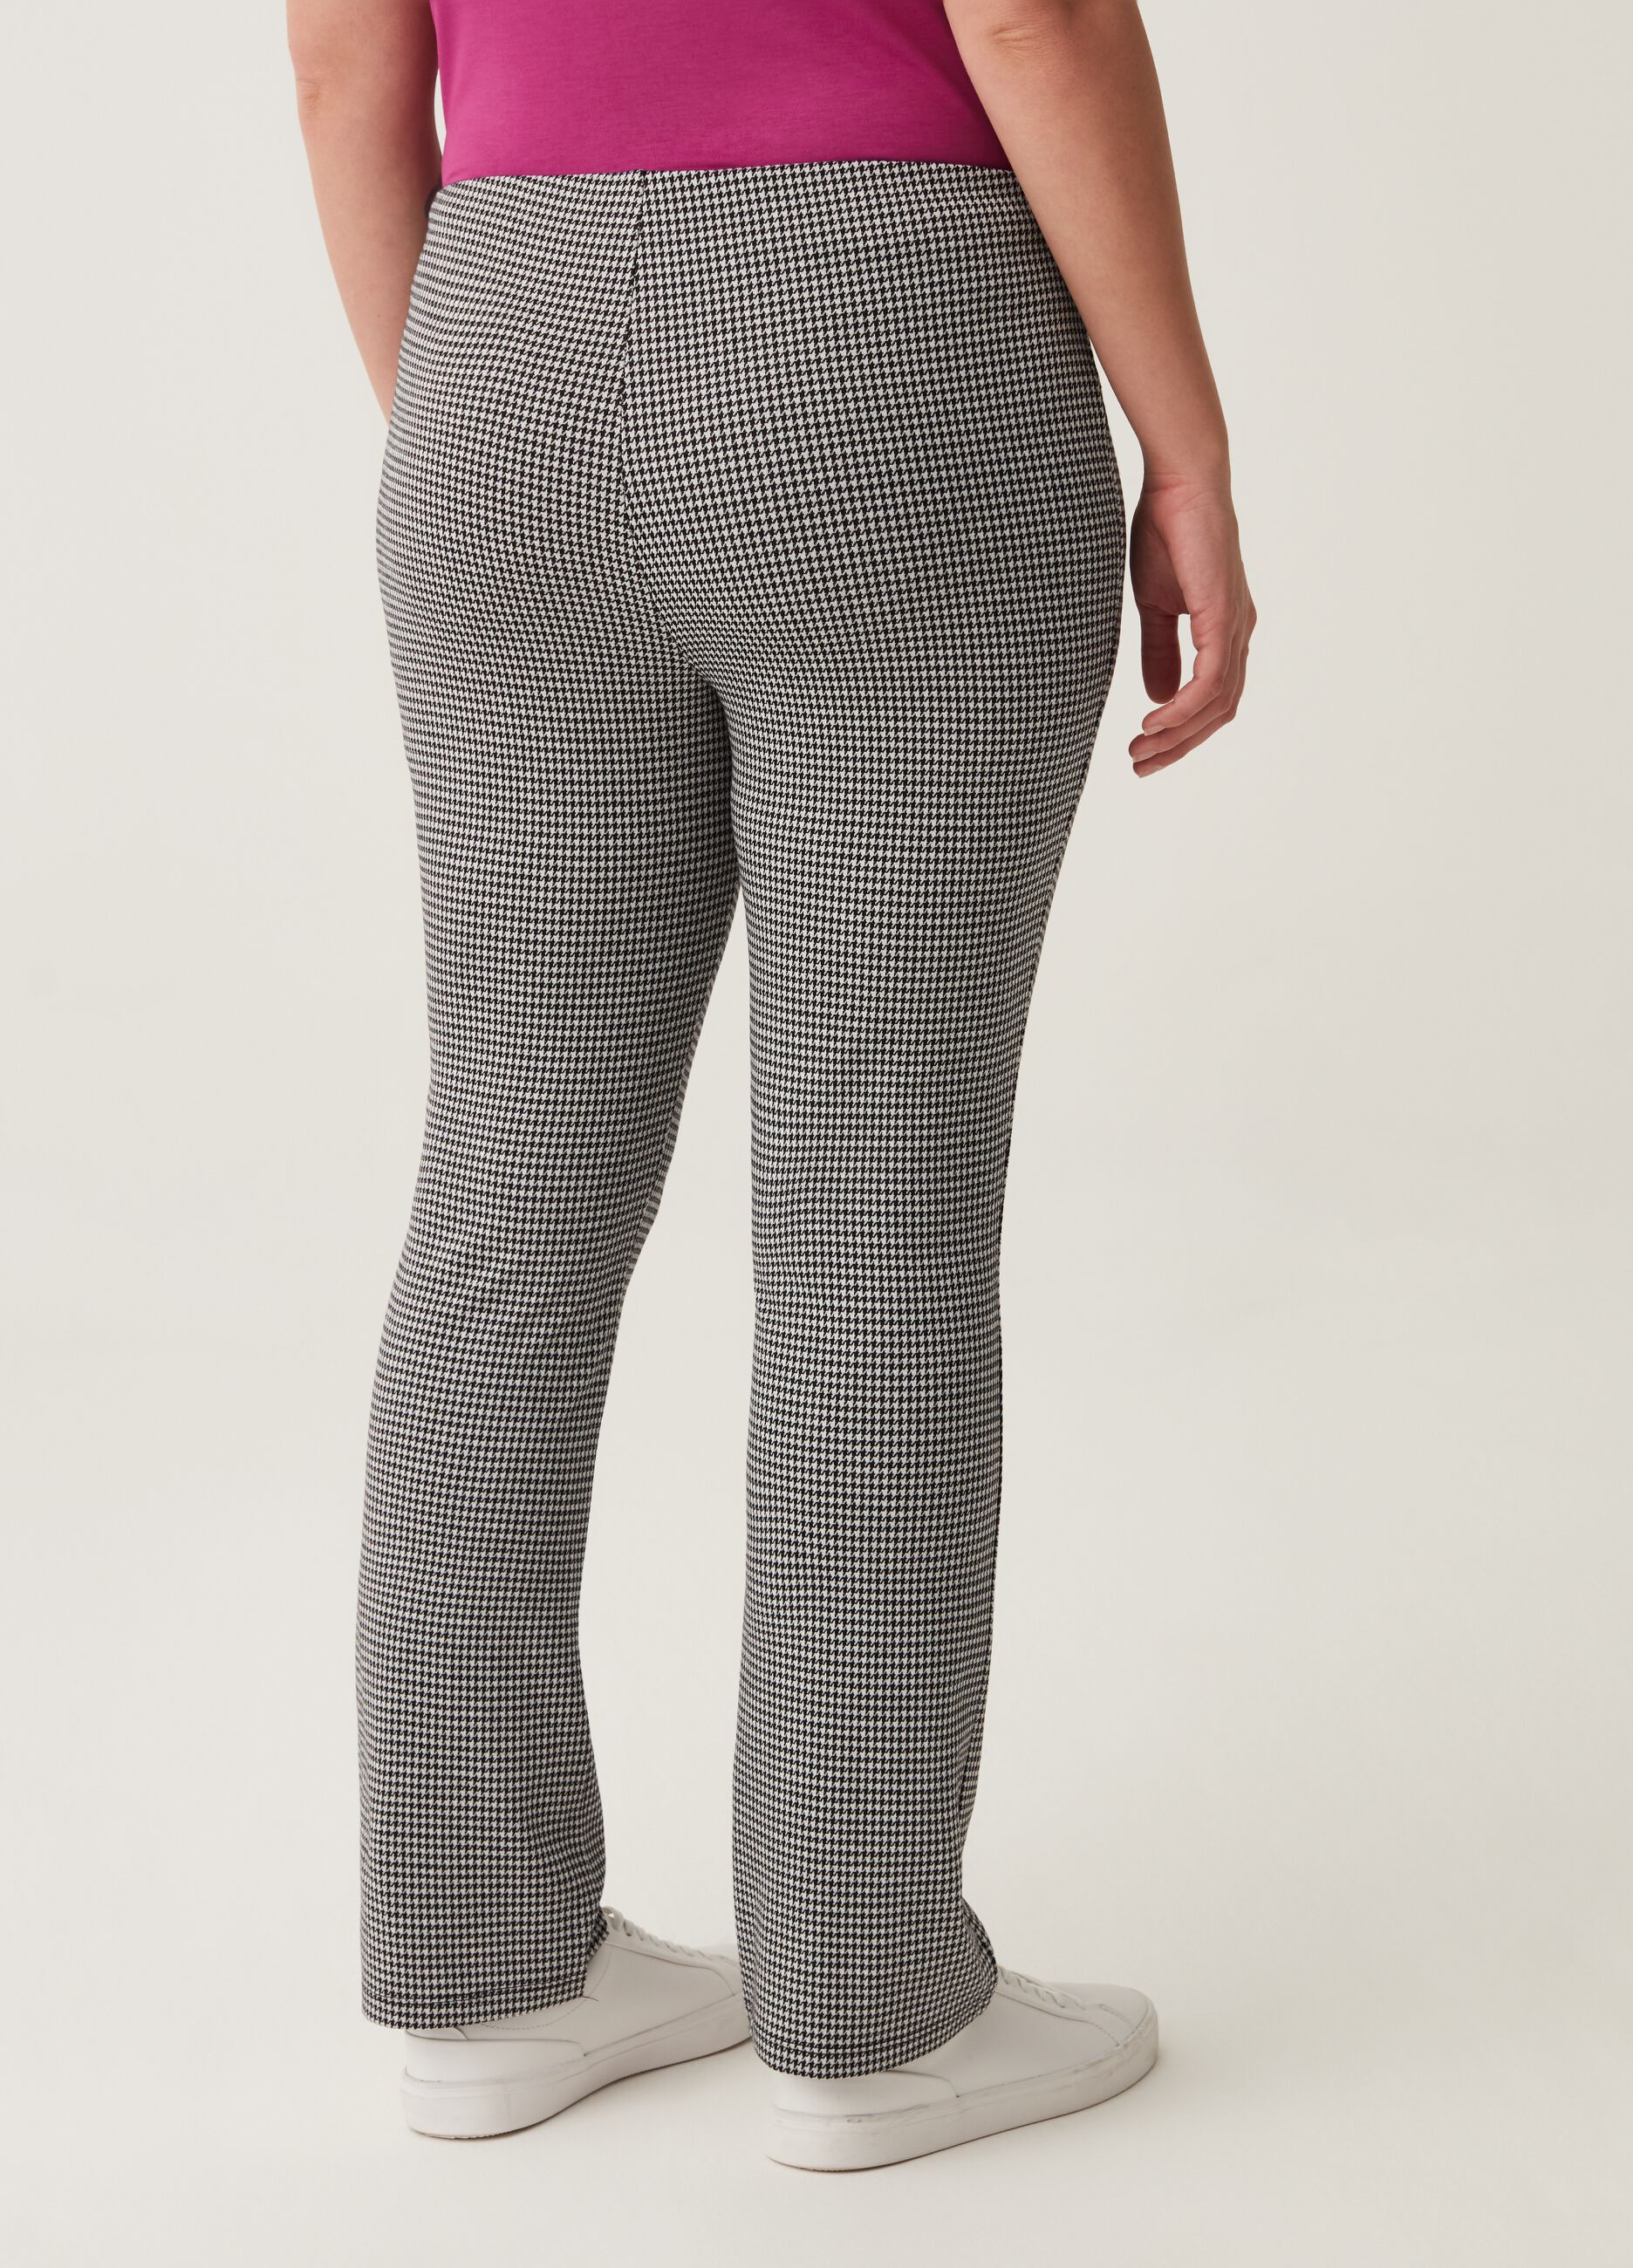 Curvy leggings with and houndstooth pattern_2